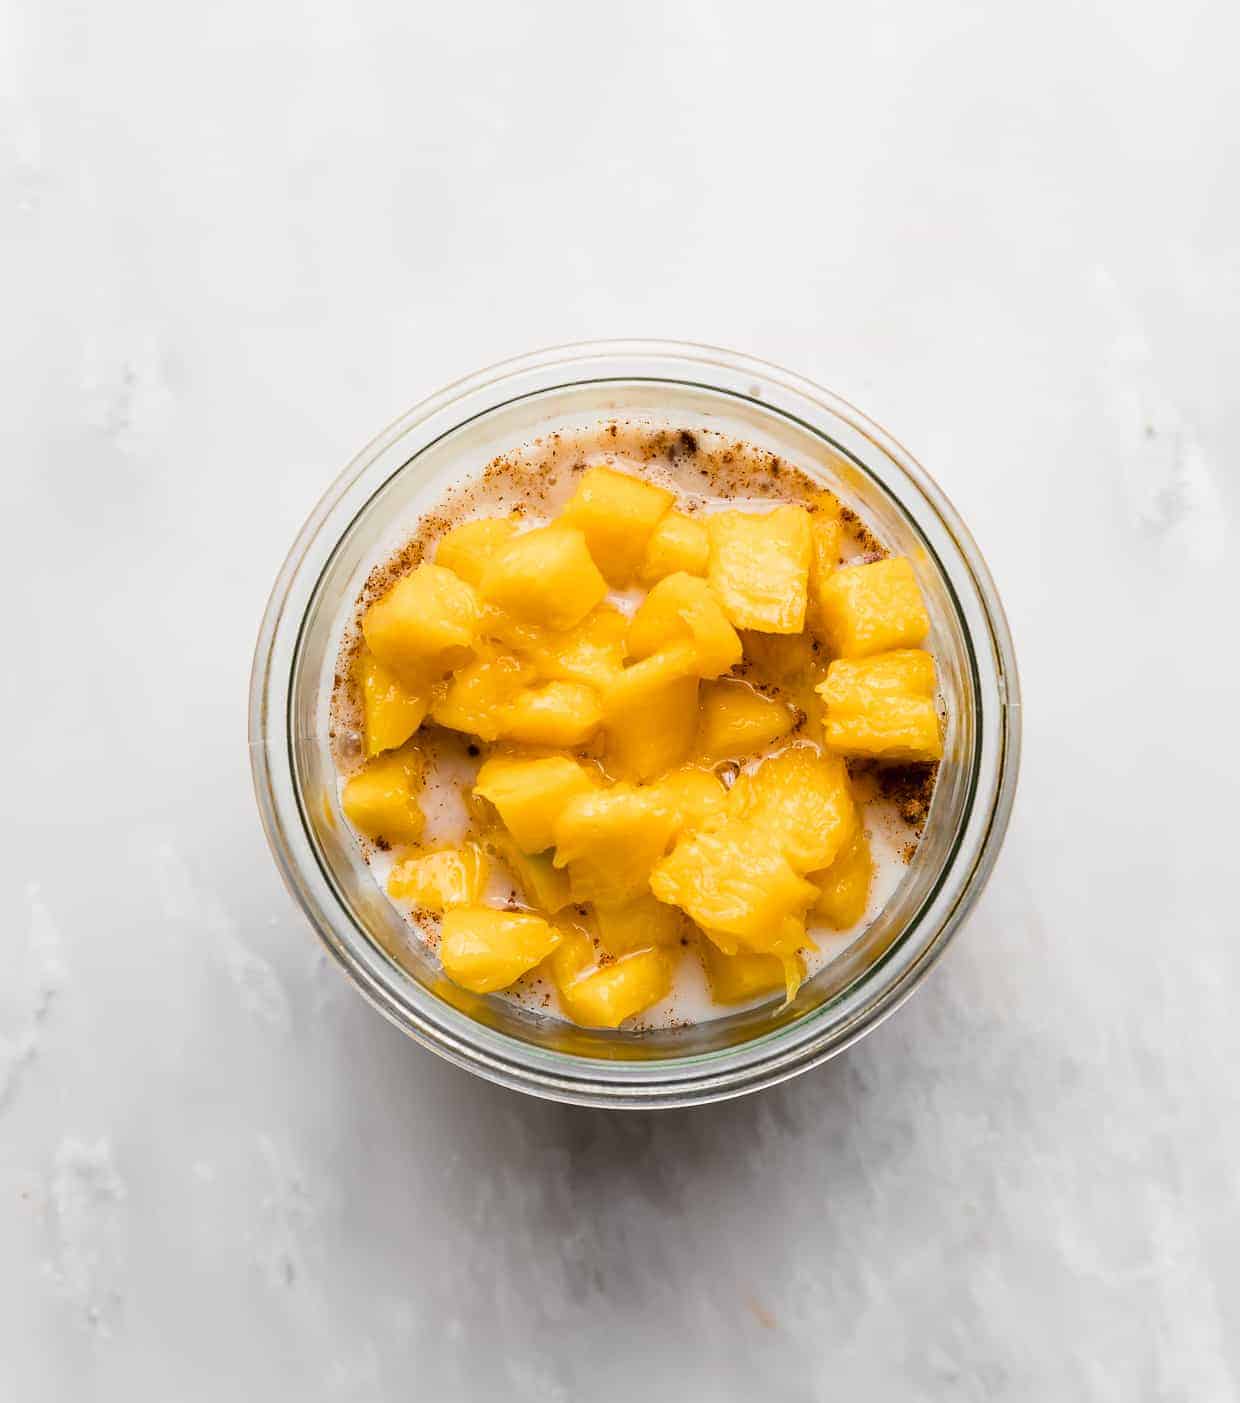 Diced mango overtop of a milk and oat mixture in a glass jar.